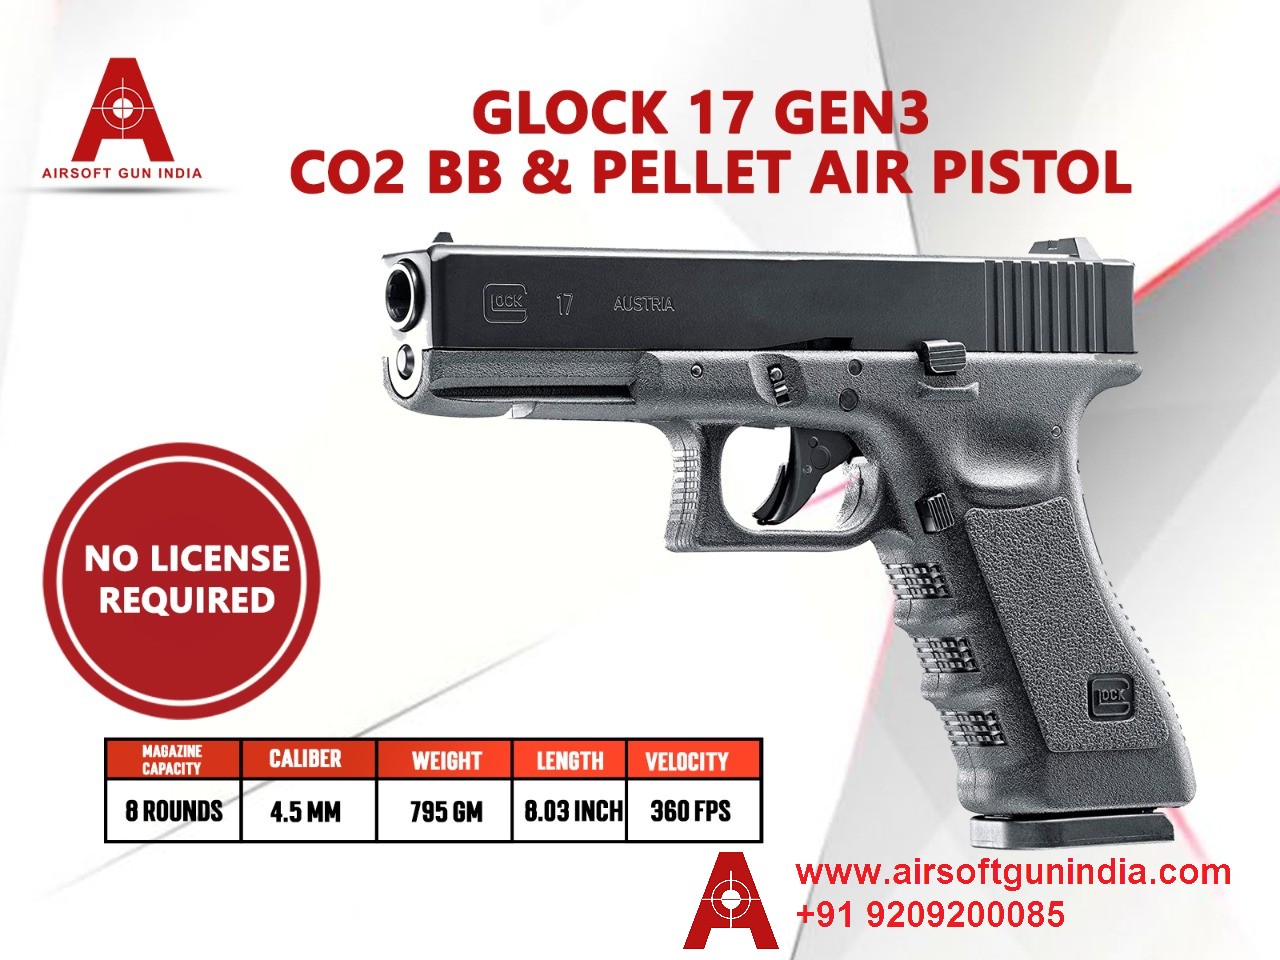 Glock 17 Generation 3 Co2 BB And Pellet .177Cal, 4.5mm Air Pistol By Airsoft Gun India